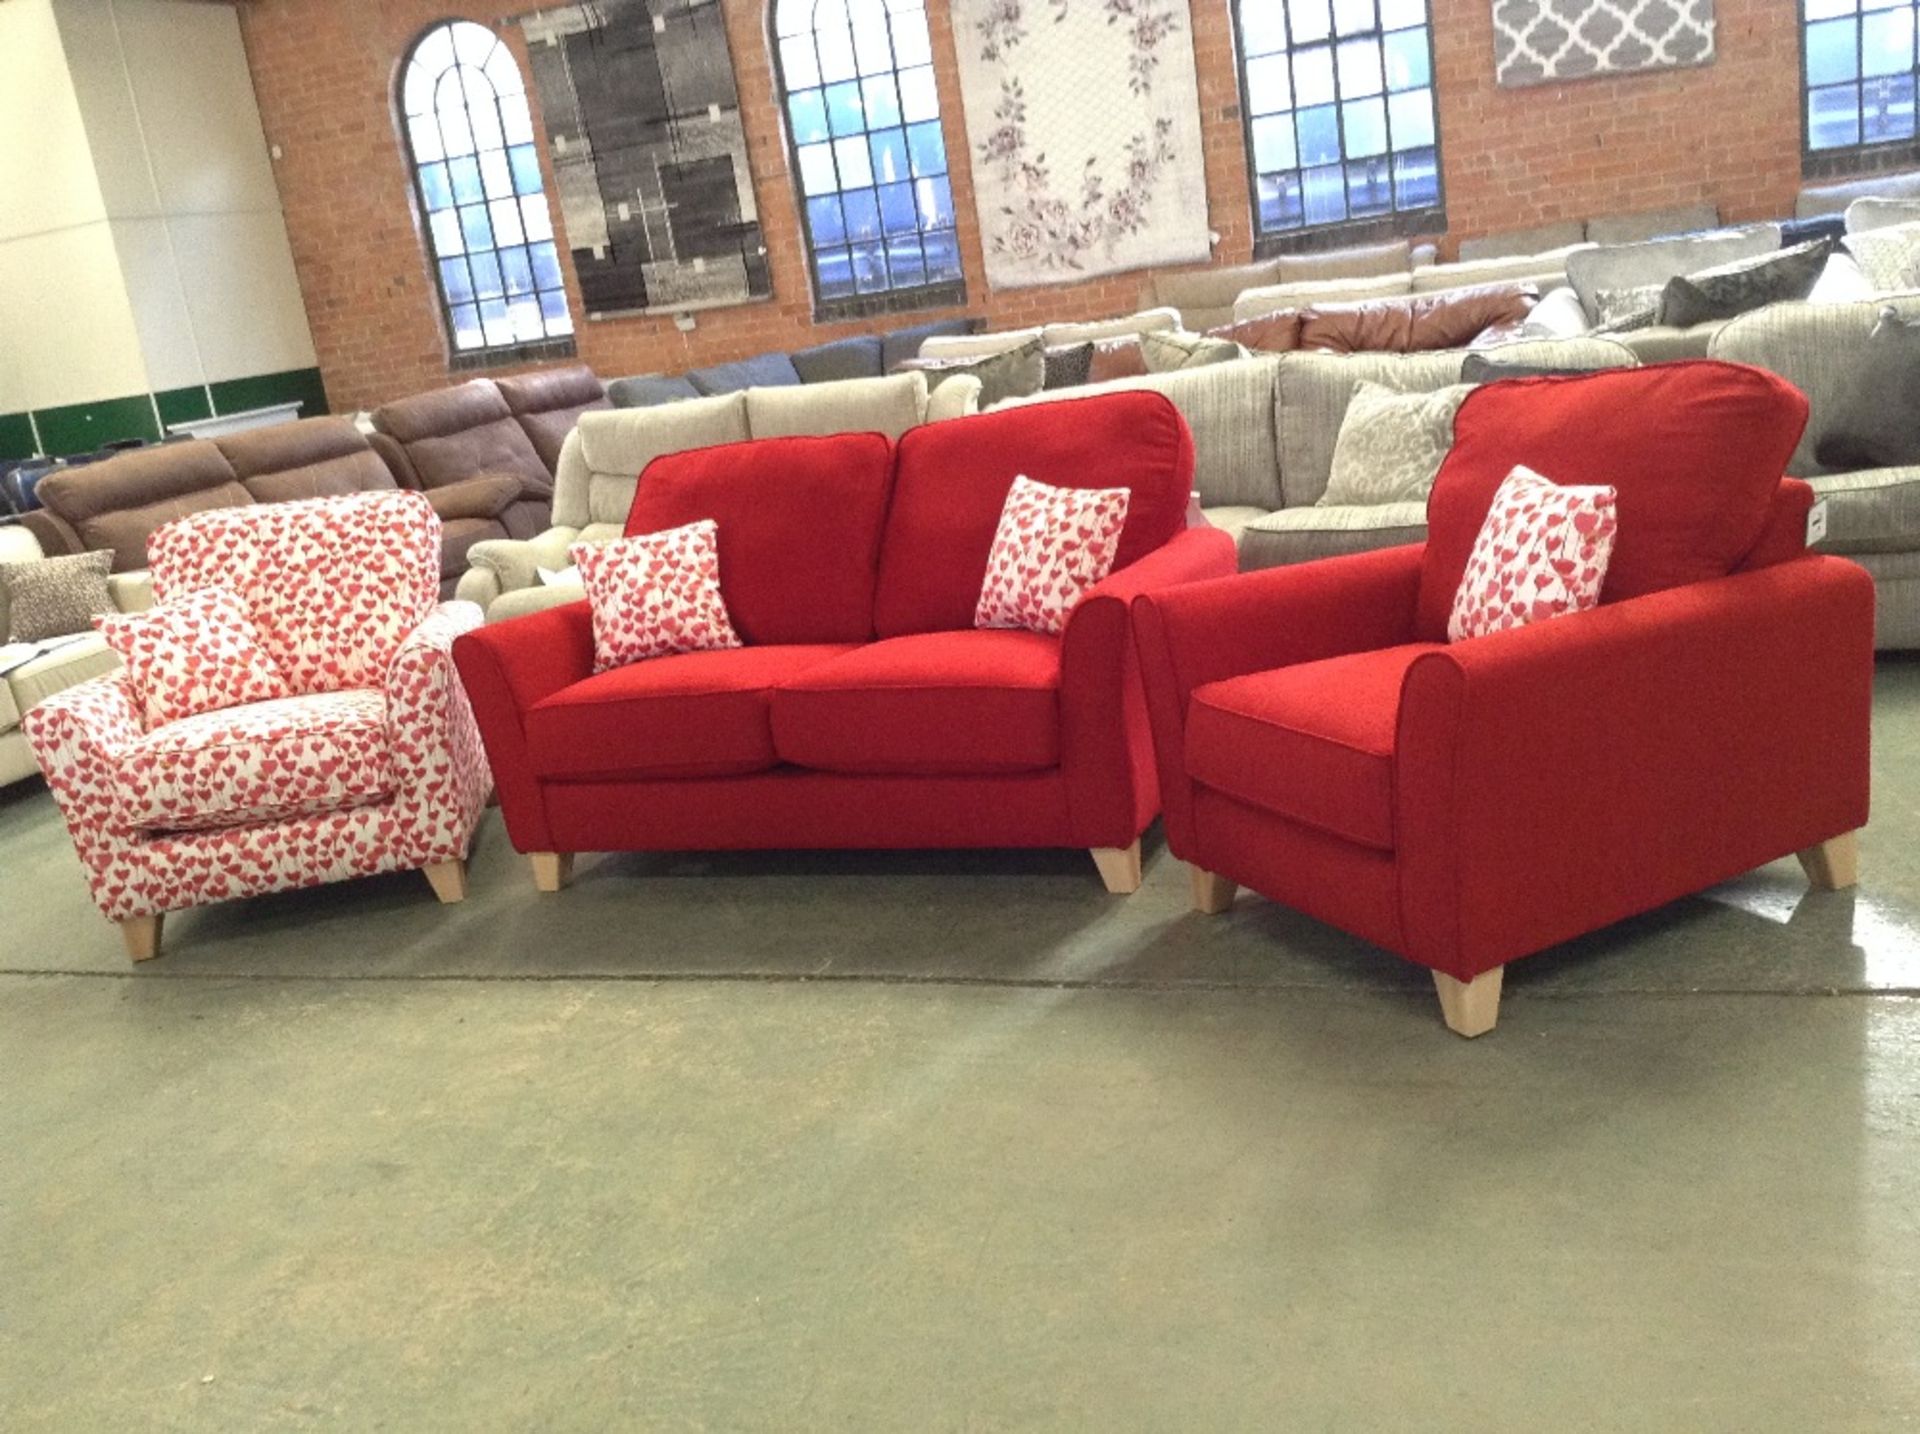 MELBOURNE 2 SEATER SMALL,CORSICA RED AND CHAIR,CORSICA RED AND CHAIR,TULIPPA RED (SFL119) - (SFL120)